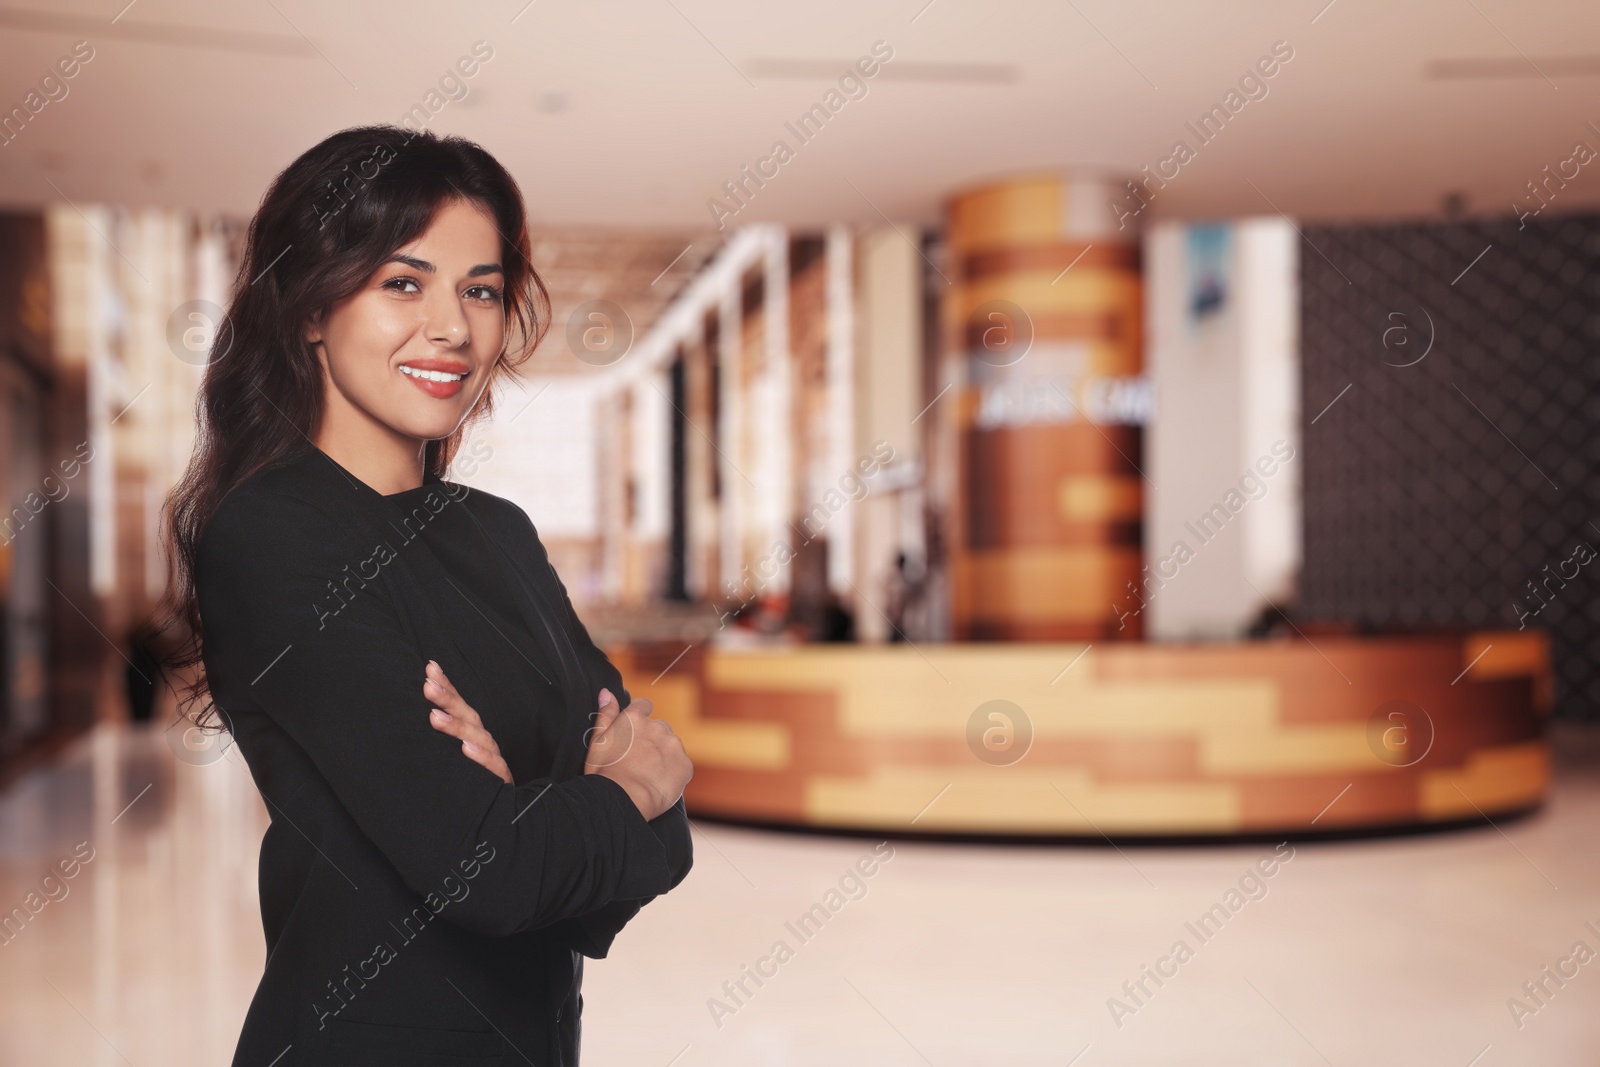 Image of Portrait of hostess wearing uniform in shopping mall. Space for text